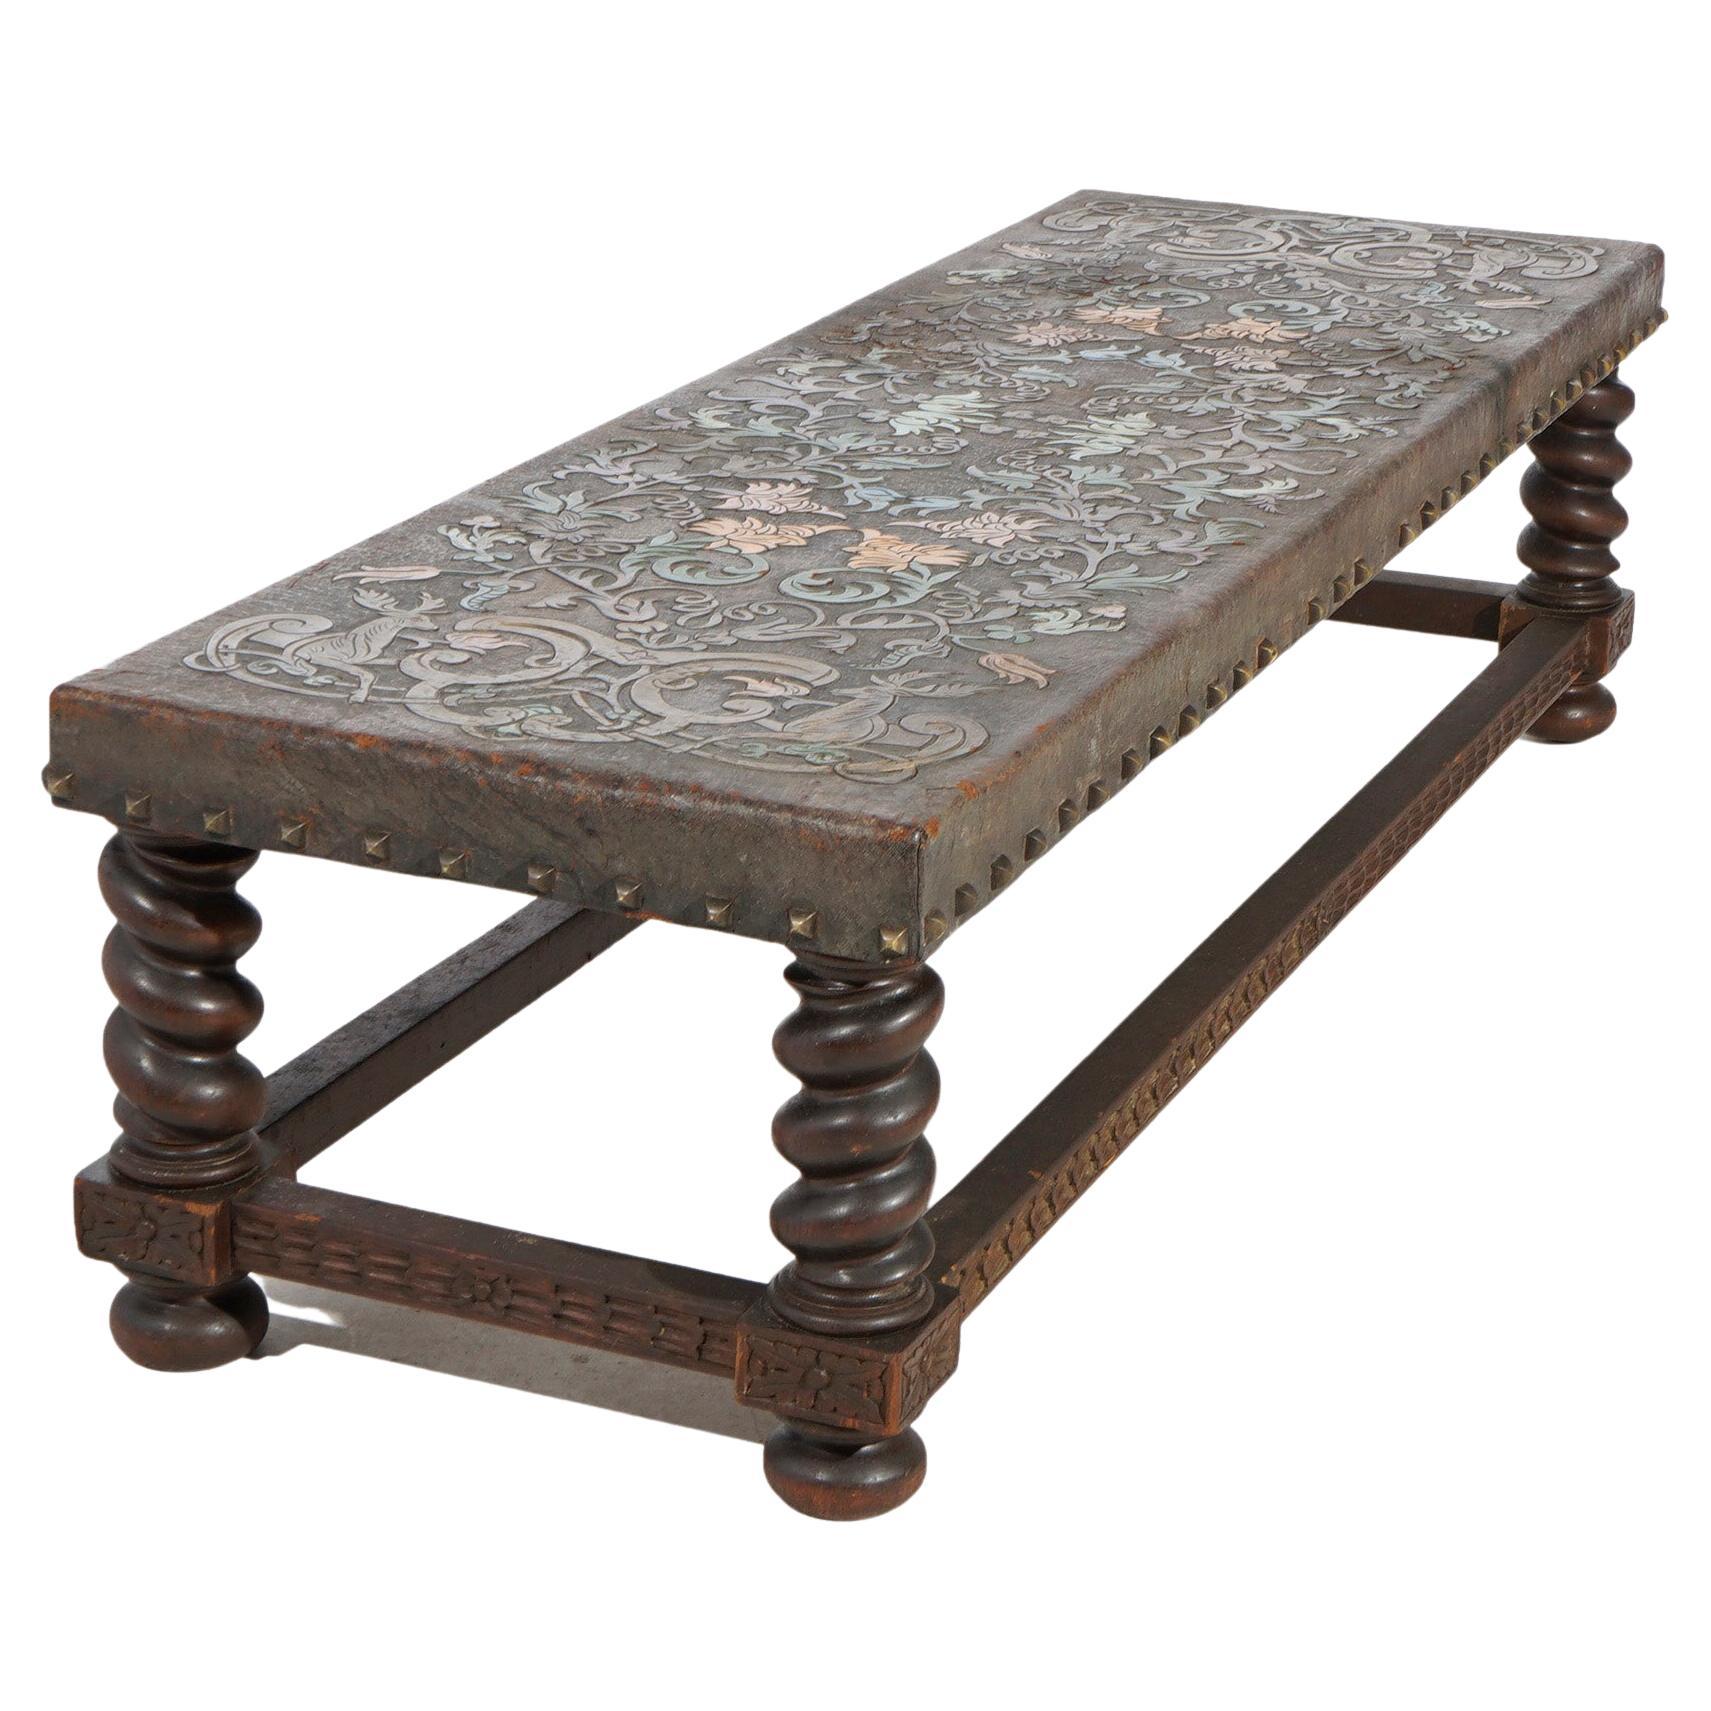 Antique Elizabethan Carved Oak & Tooled Leather Low Bench, Circa 1910